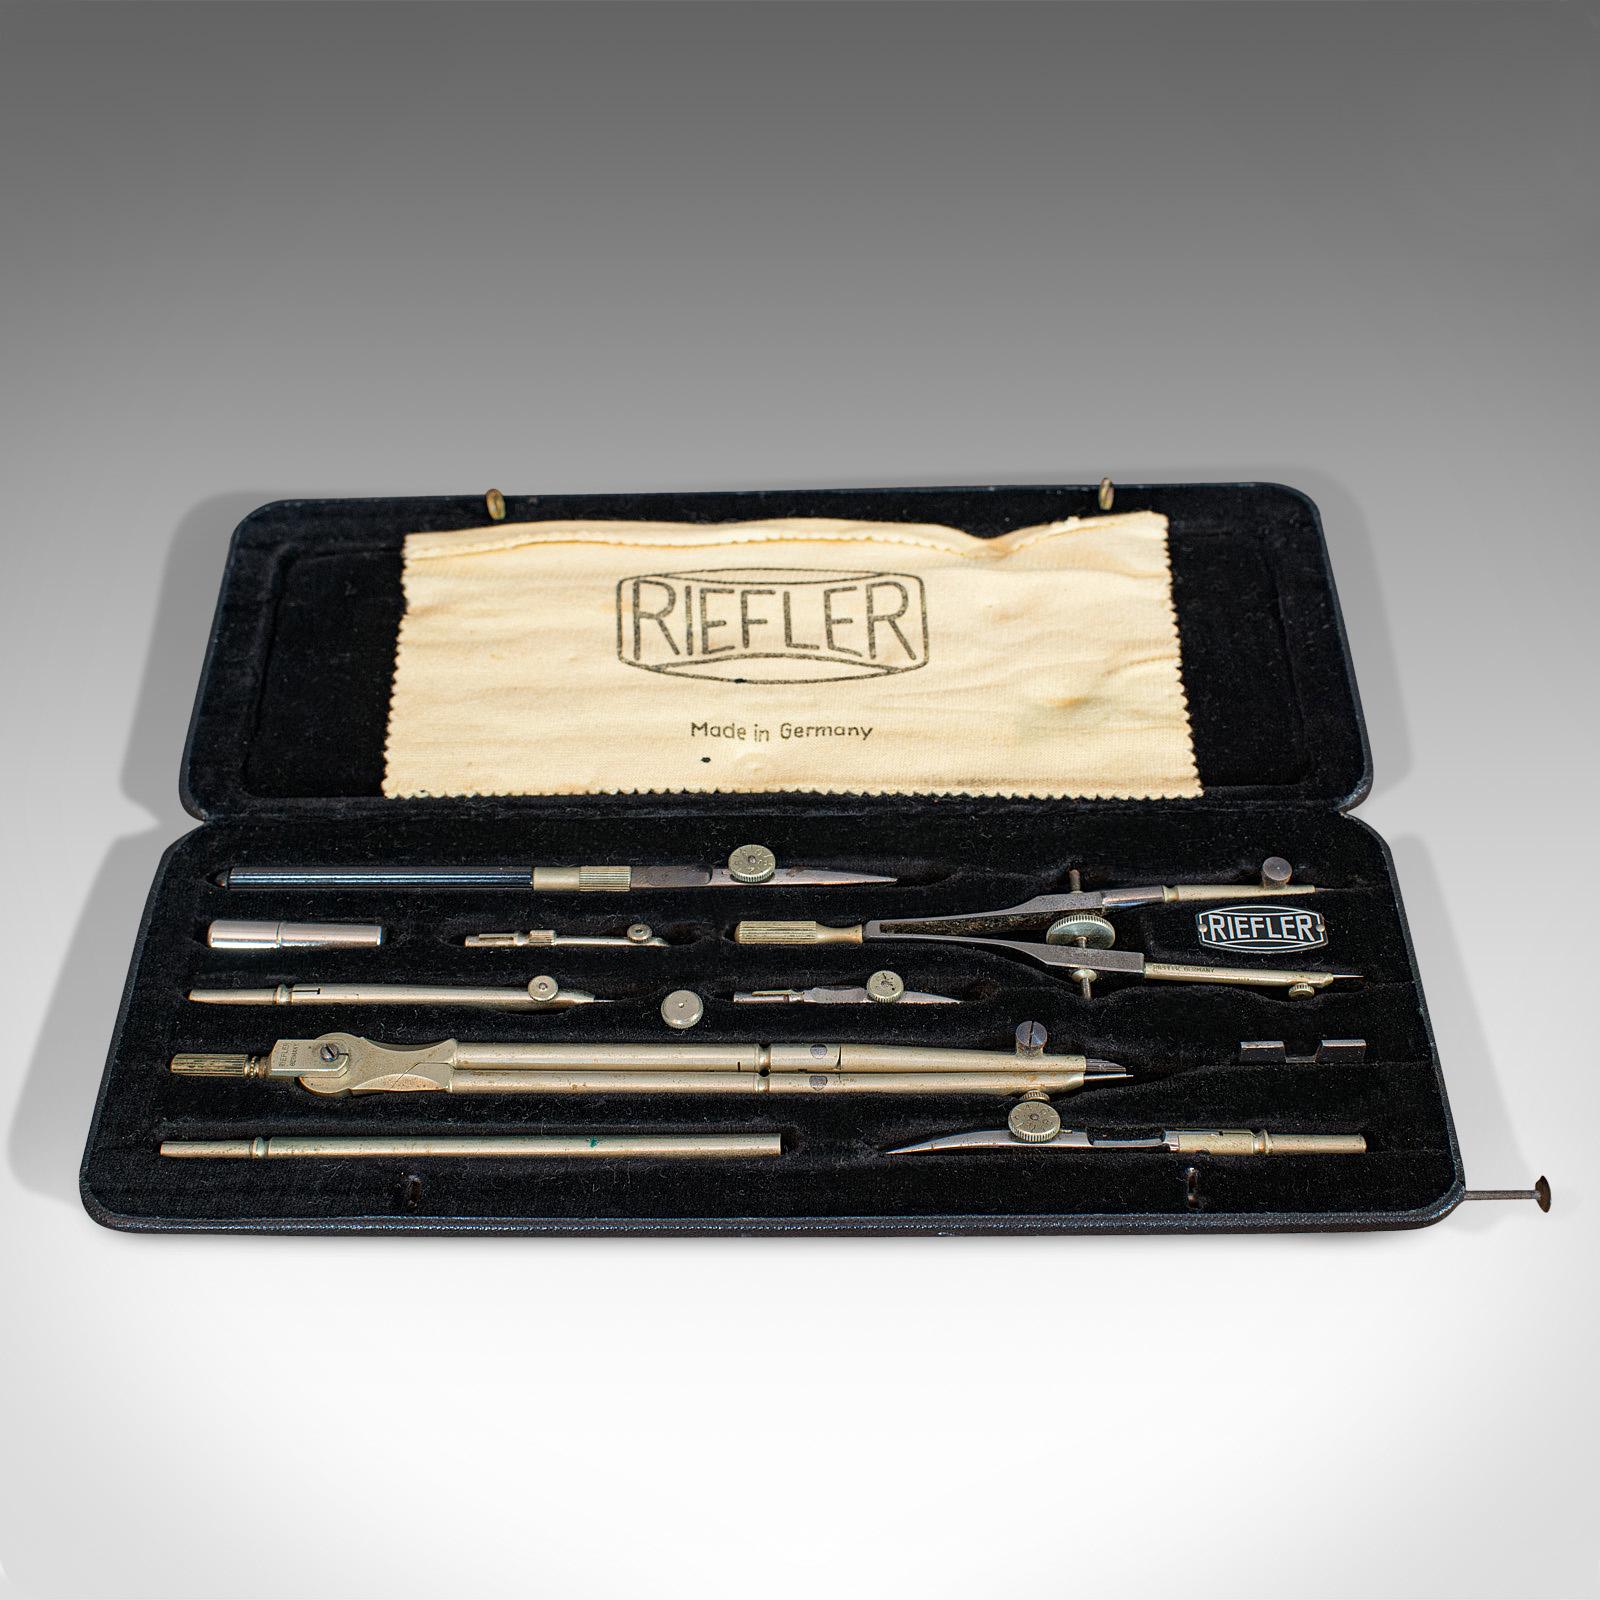 This is a vintage technical drawing case. A German, silver nickel surveyor's set by Riefler of Munich, dating to the mid-20th century, circa 1950.

Quality, vintage set by a renowned maker
Displaying a desirable aged patina
Silver nickel